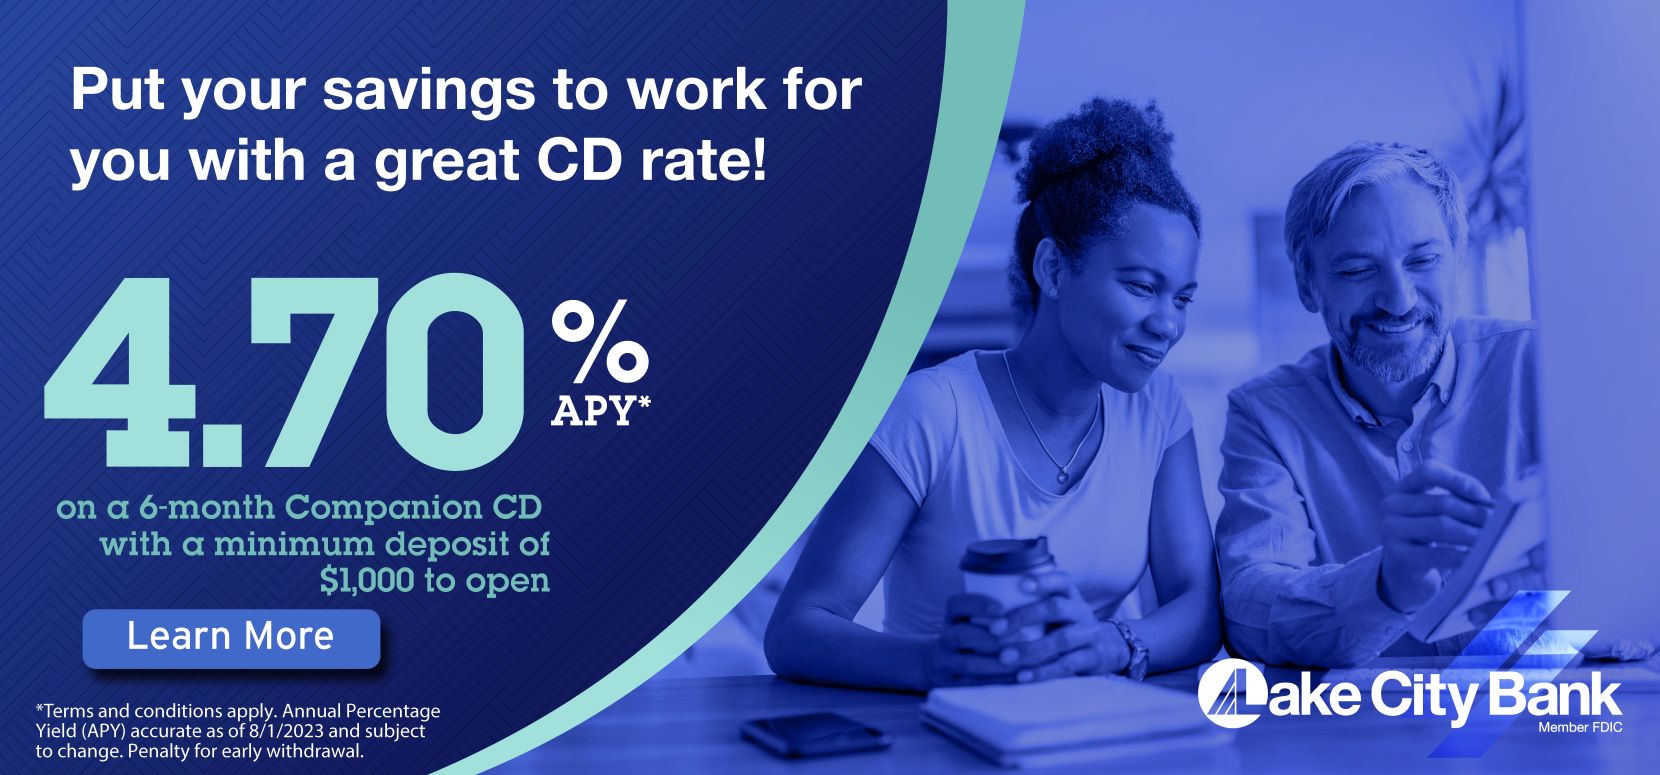 4.70% 8-month Companion CD Offer - Learn More